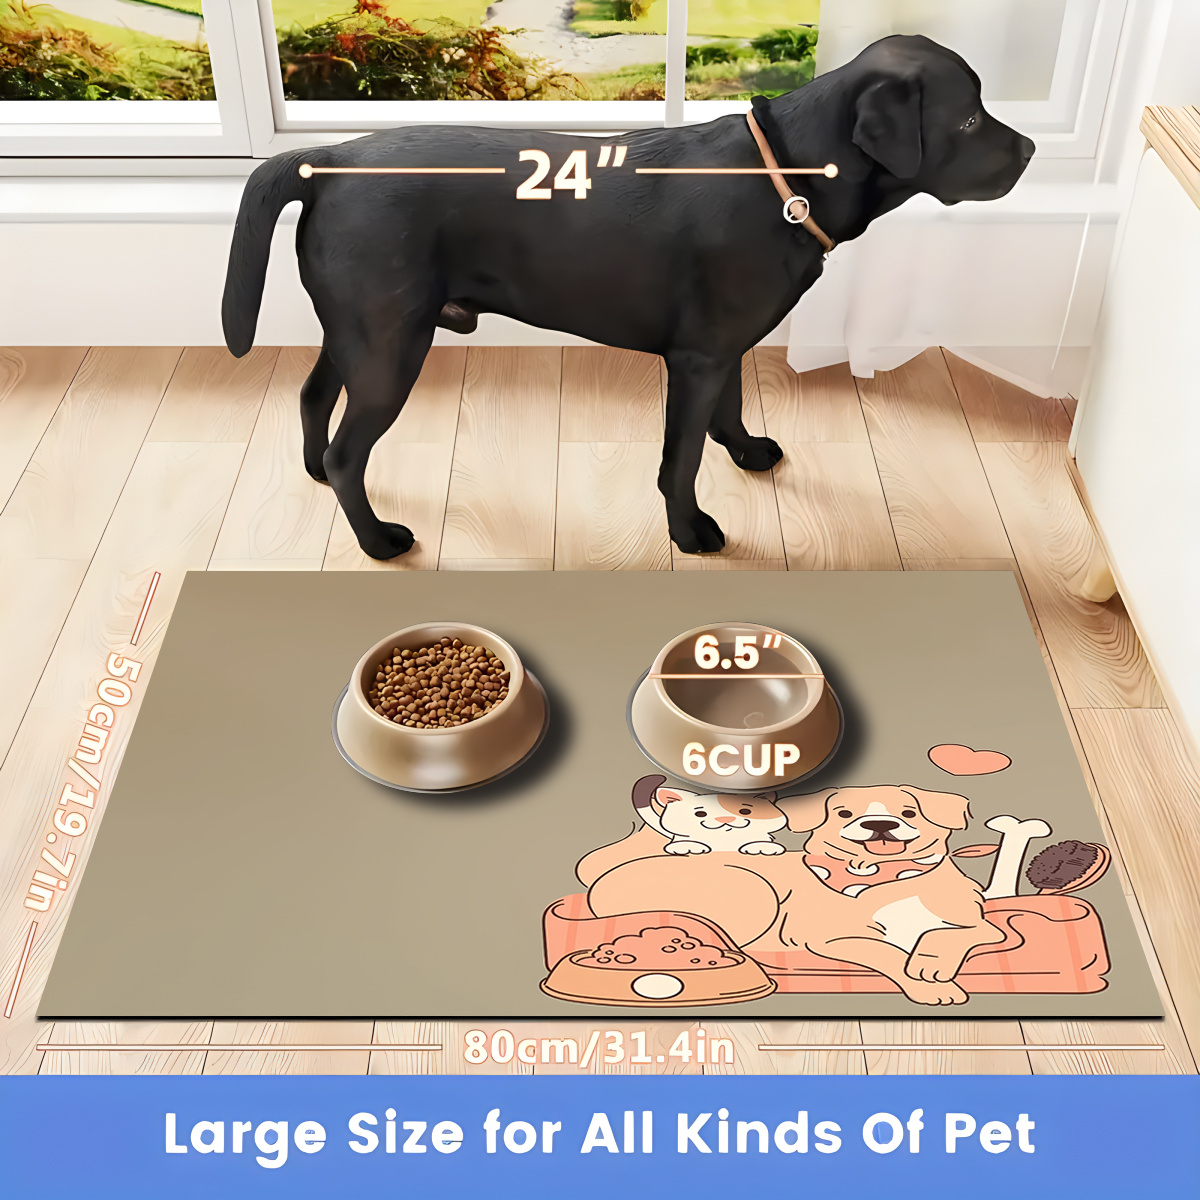 

1pc Quick-dry Pet Feeding Mat For Dogs & Cats - Non-slip, Waterproof, Splash-proof Food Placemat